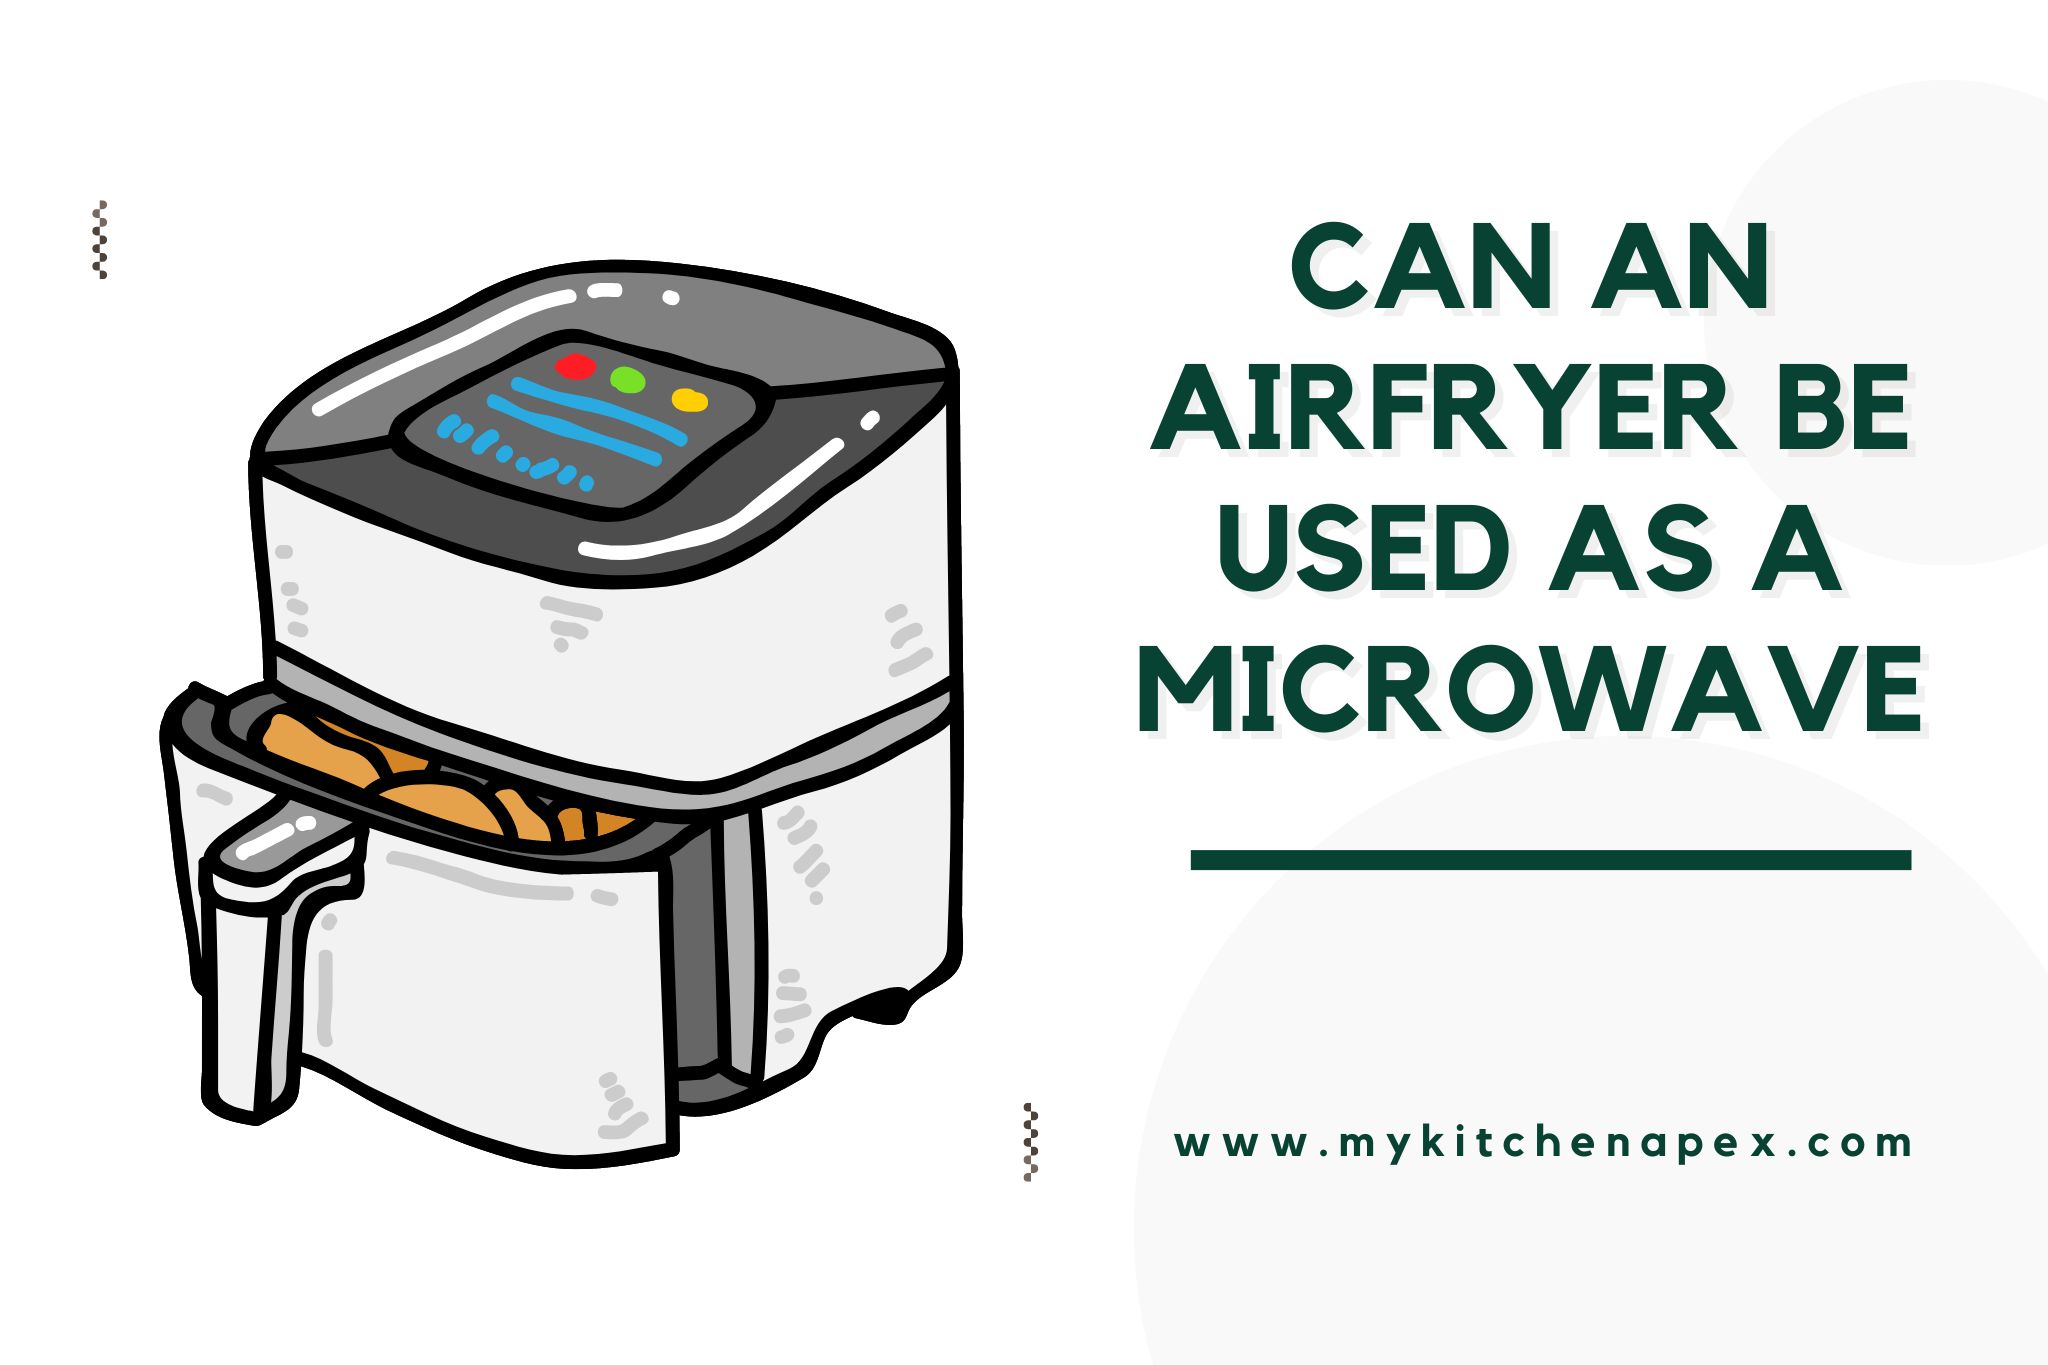 can an airfryer be used as a microwave